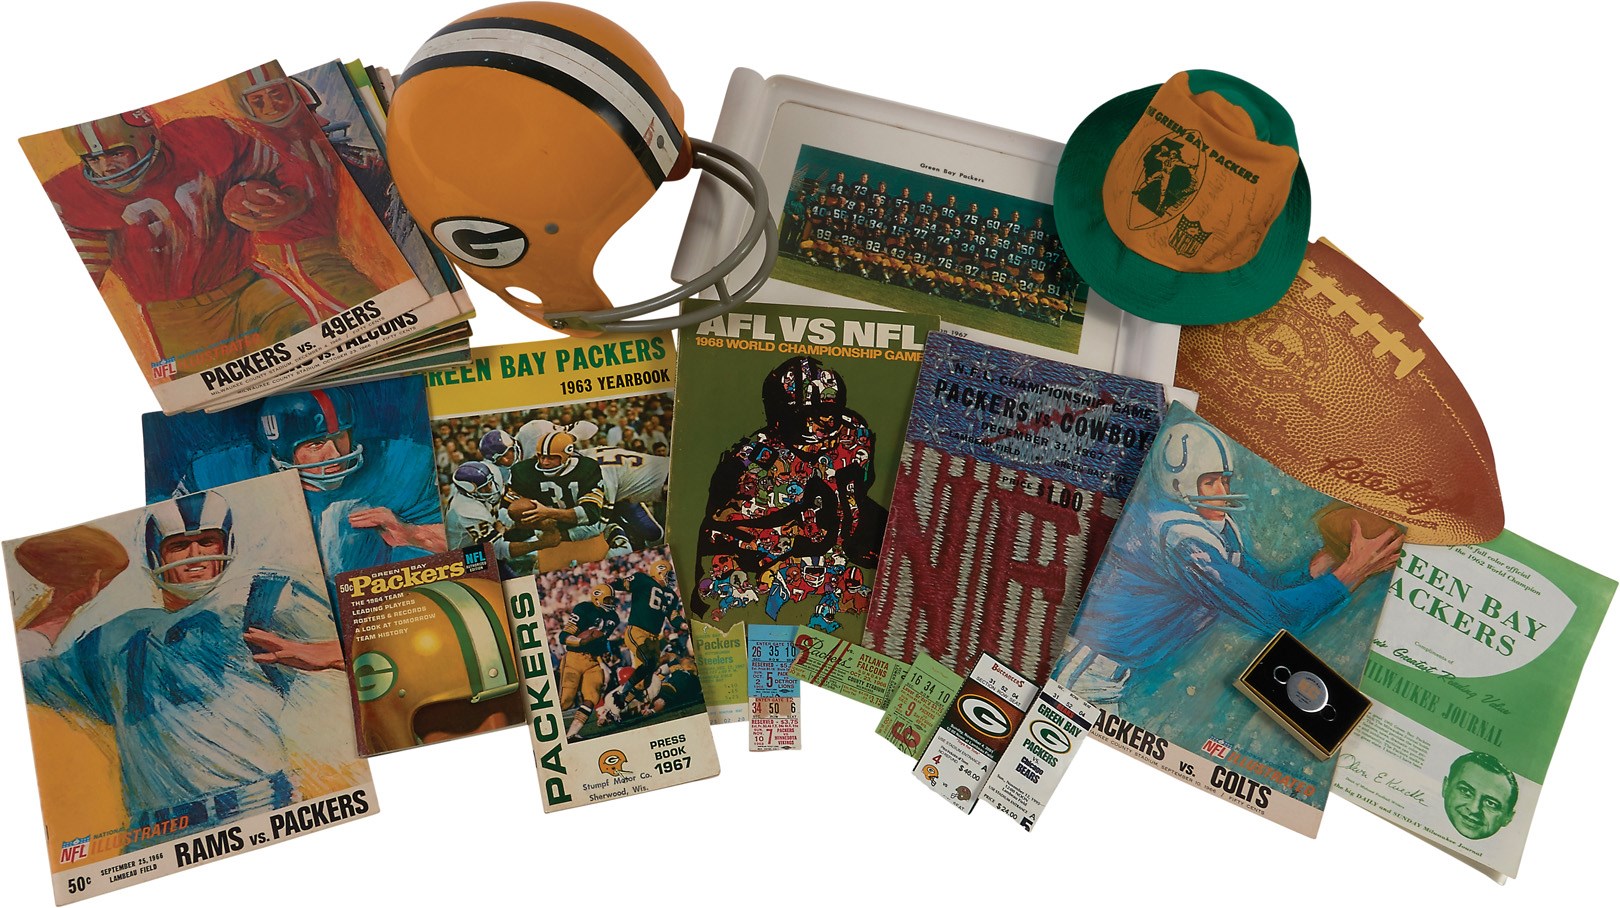 Marvelous 1960s Green Bay Packers Autographs & Publications (40)